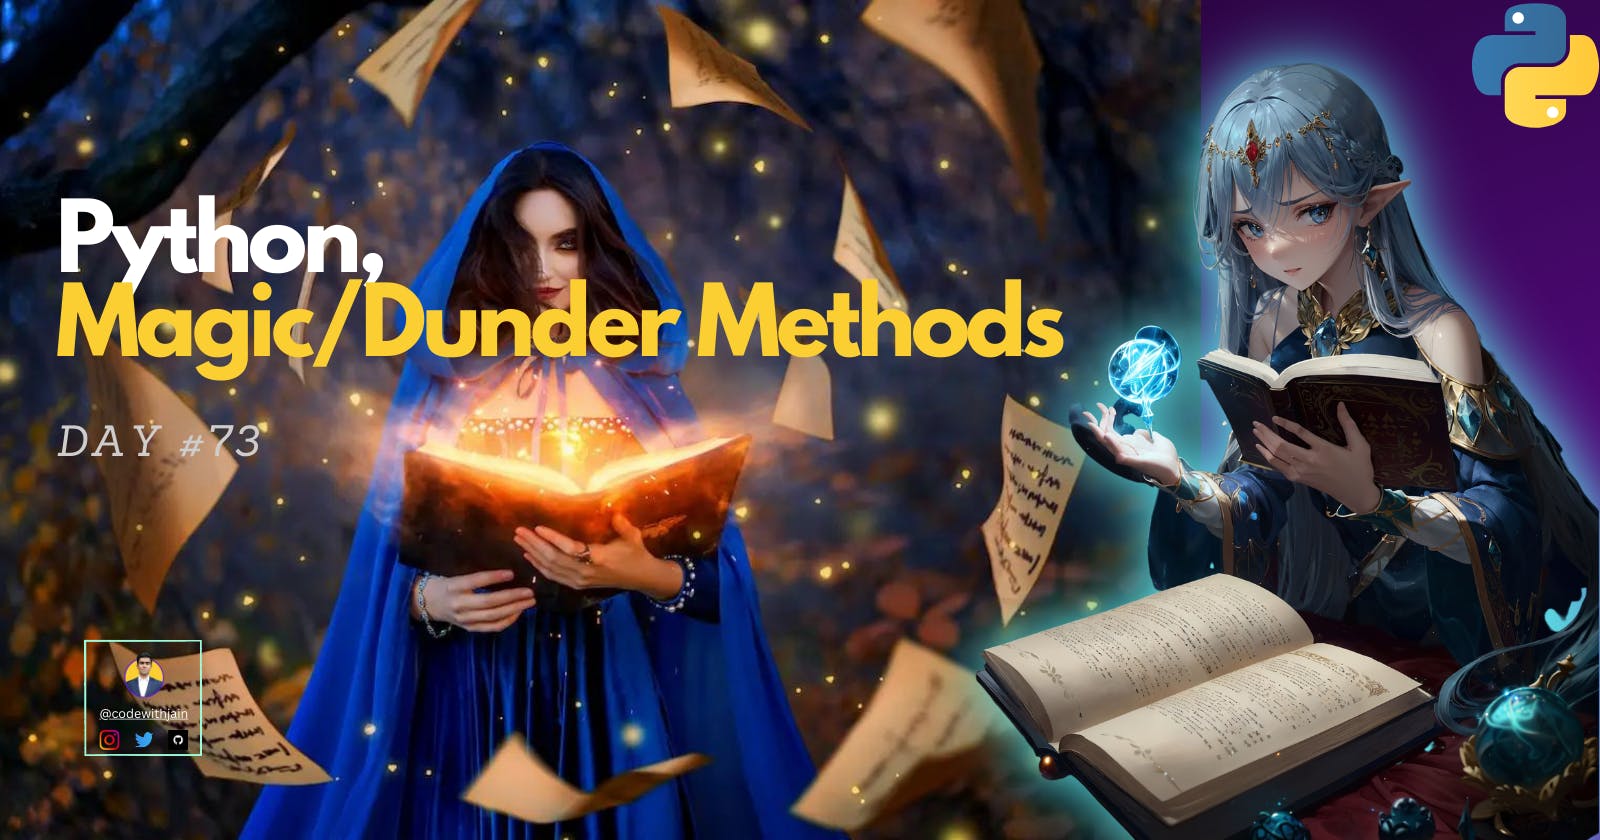 Day #73 - Magic/Dunder Methods in Python